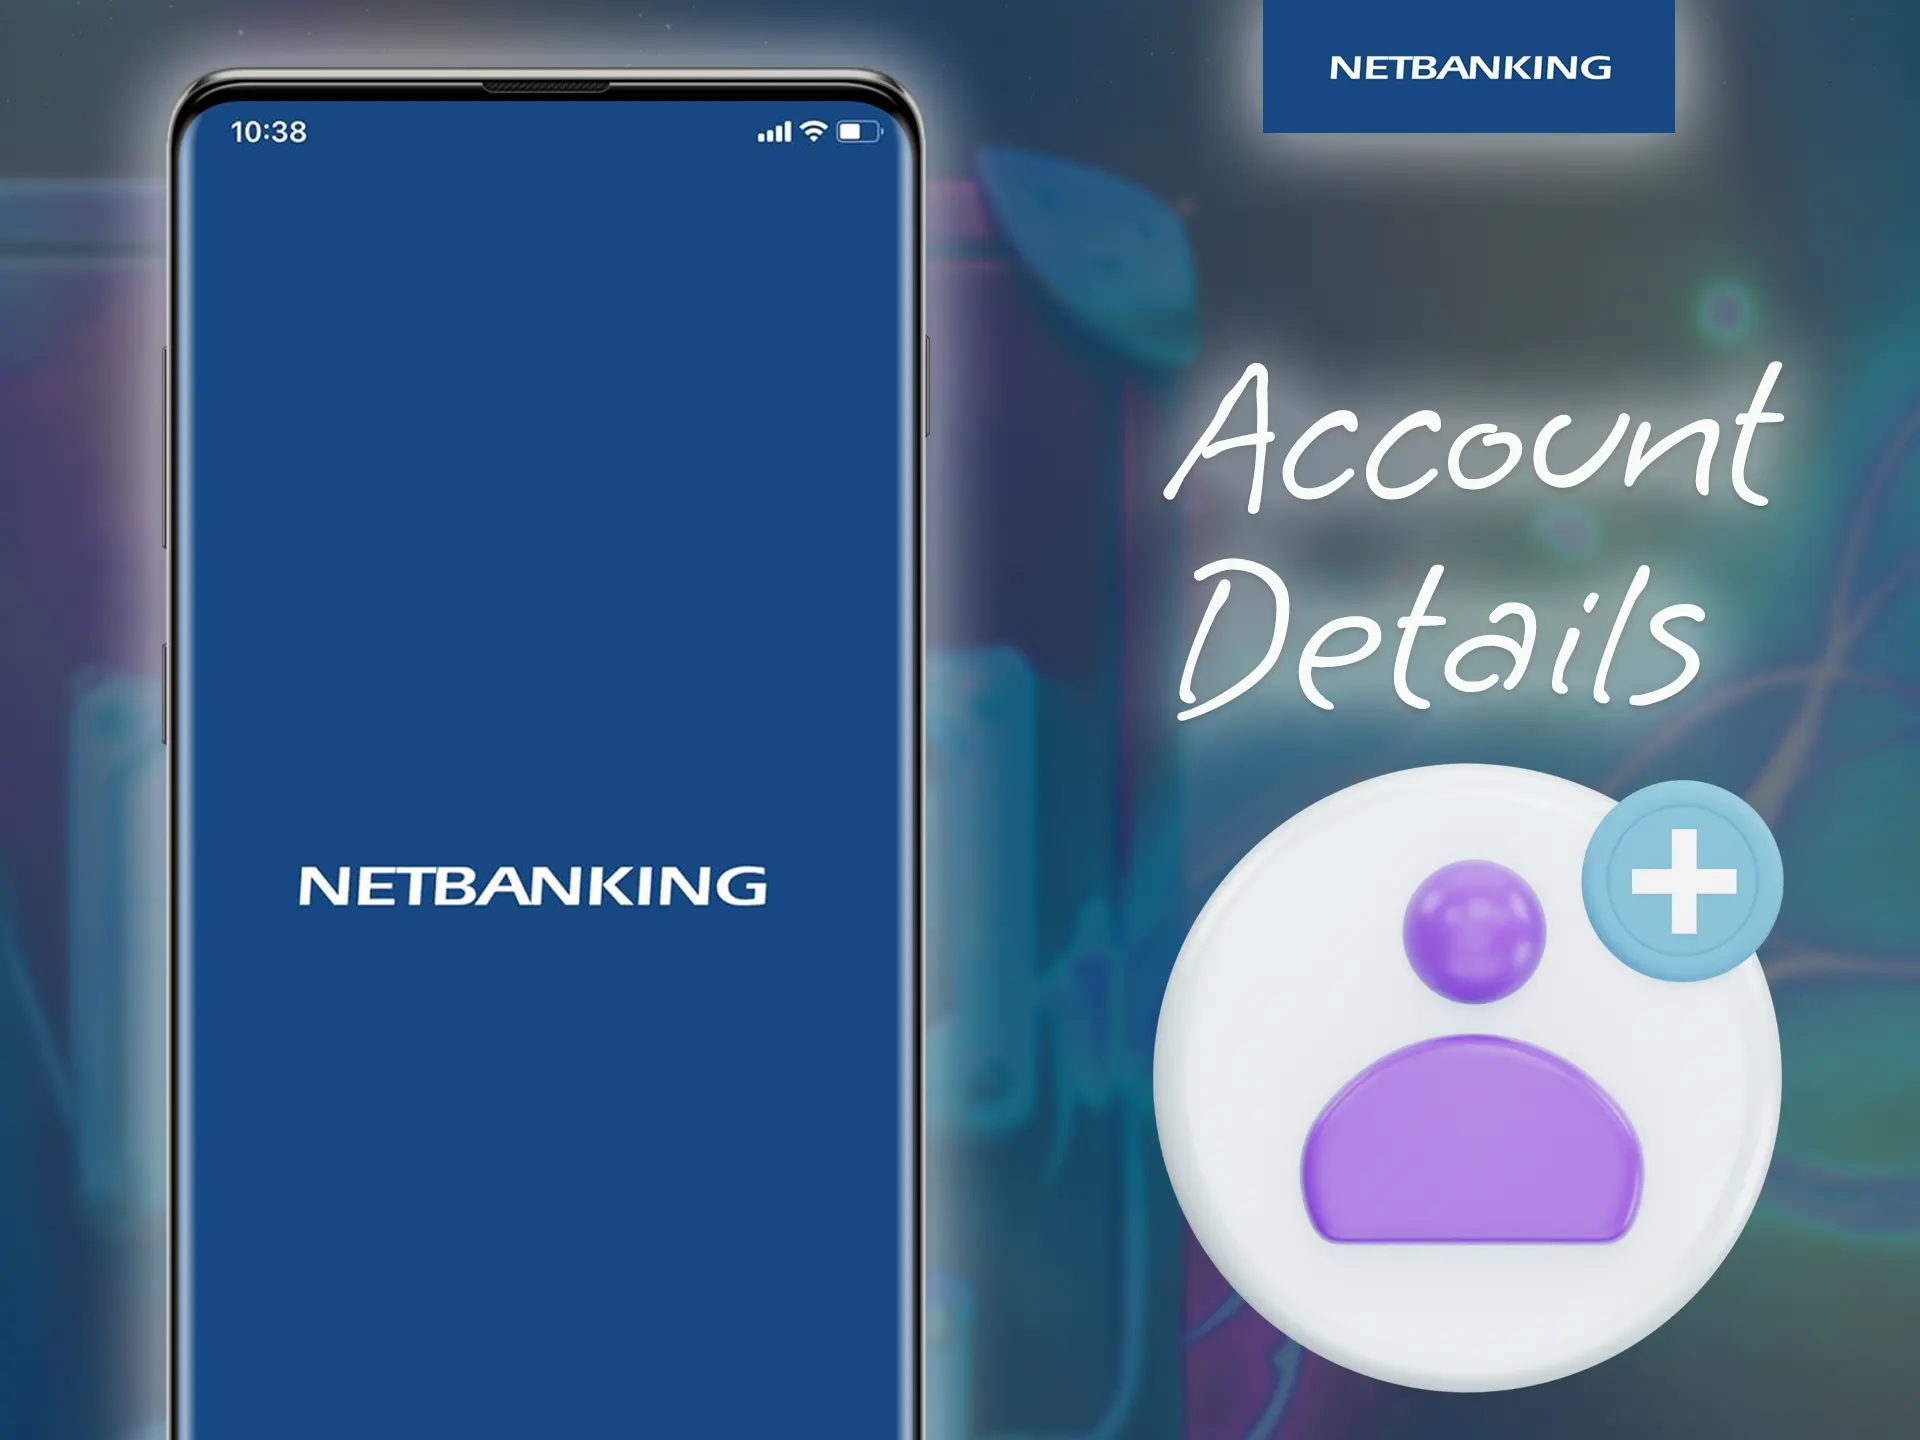 Register for Netbanking to make online payments.